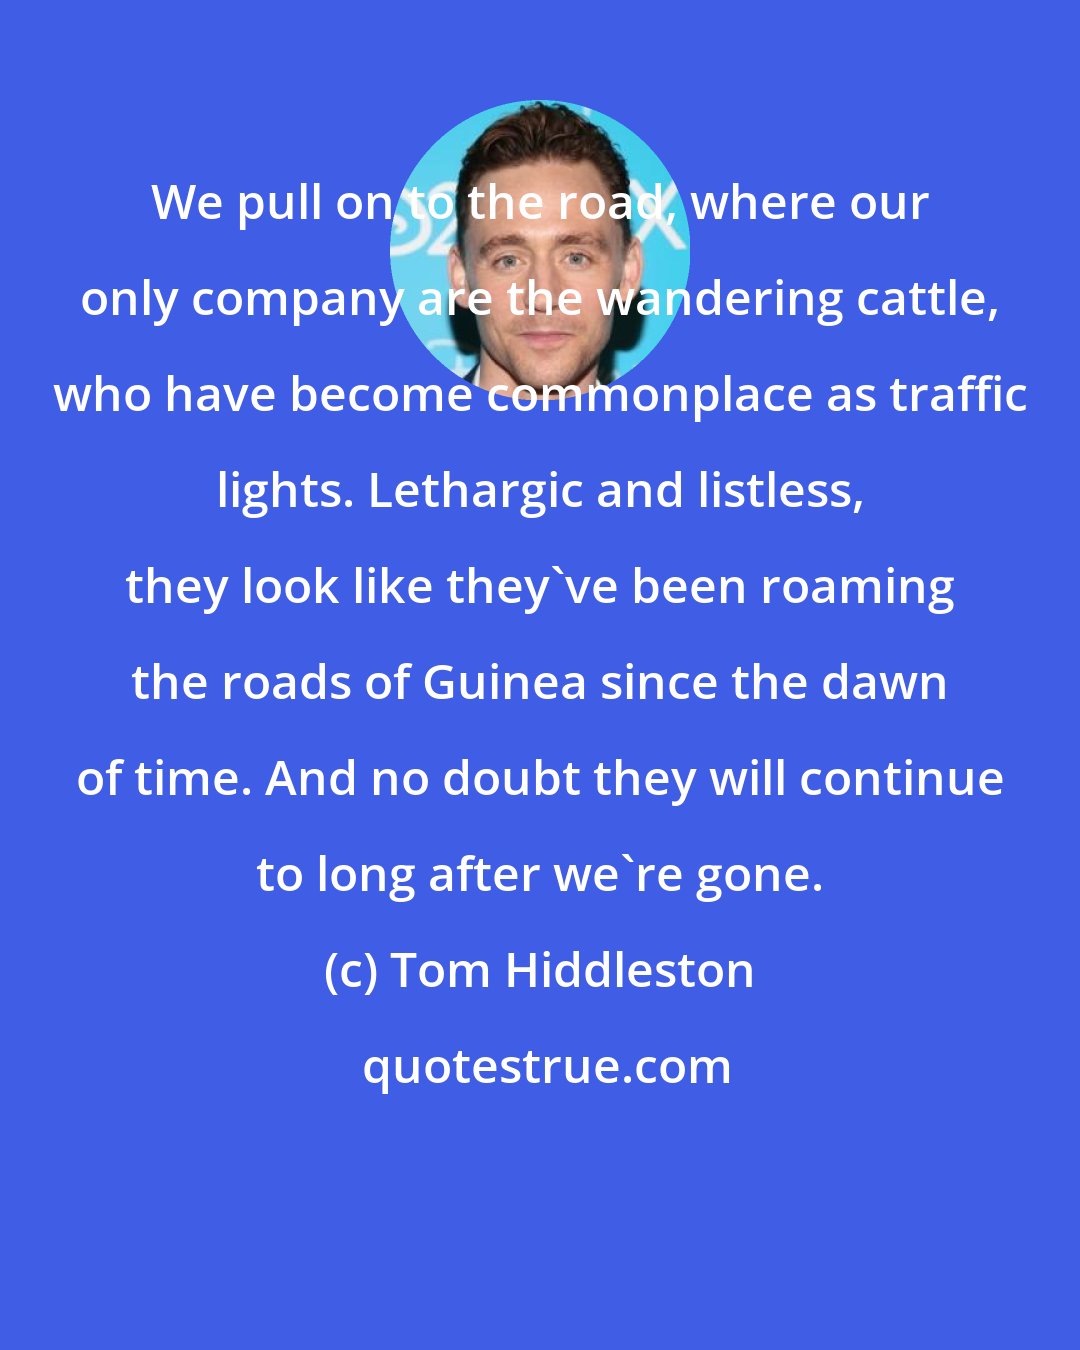 Tom Hiddleston: We pull on to the road, where our only company are the wandering cattle, who have become commonplace as traffic lights. Lethargic and listless, they look like they've been roaming the roads of Guinea since the dawn of time. And no doubt they will continue to long after we're gone.